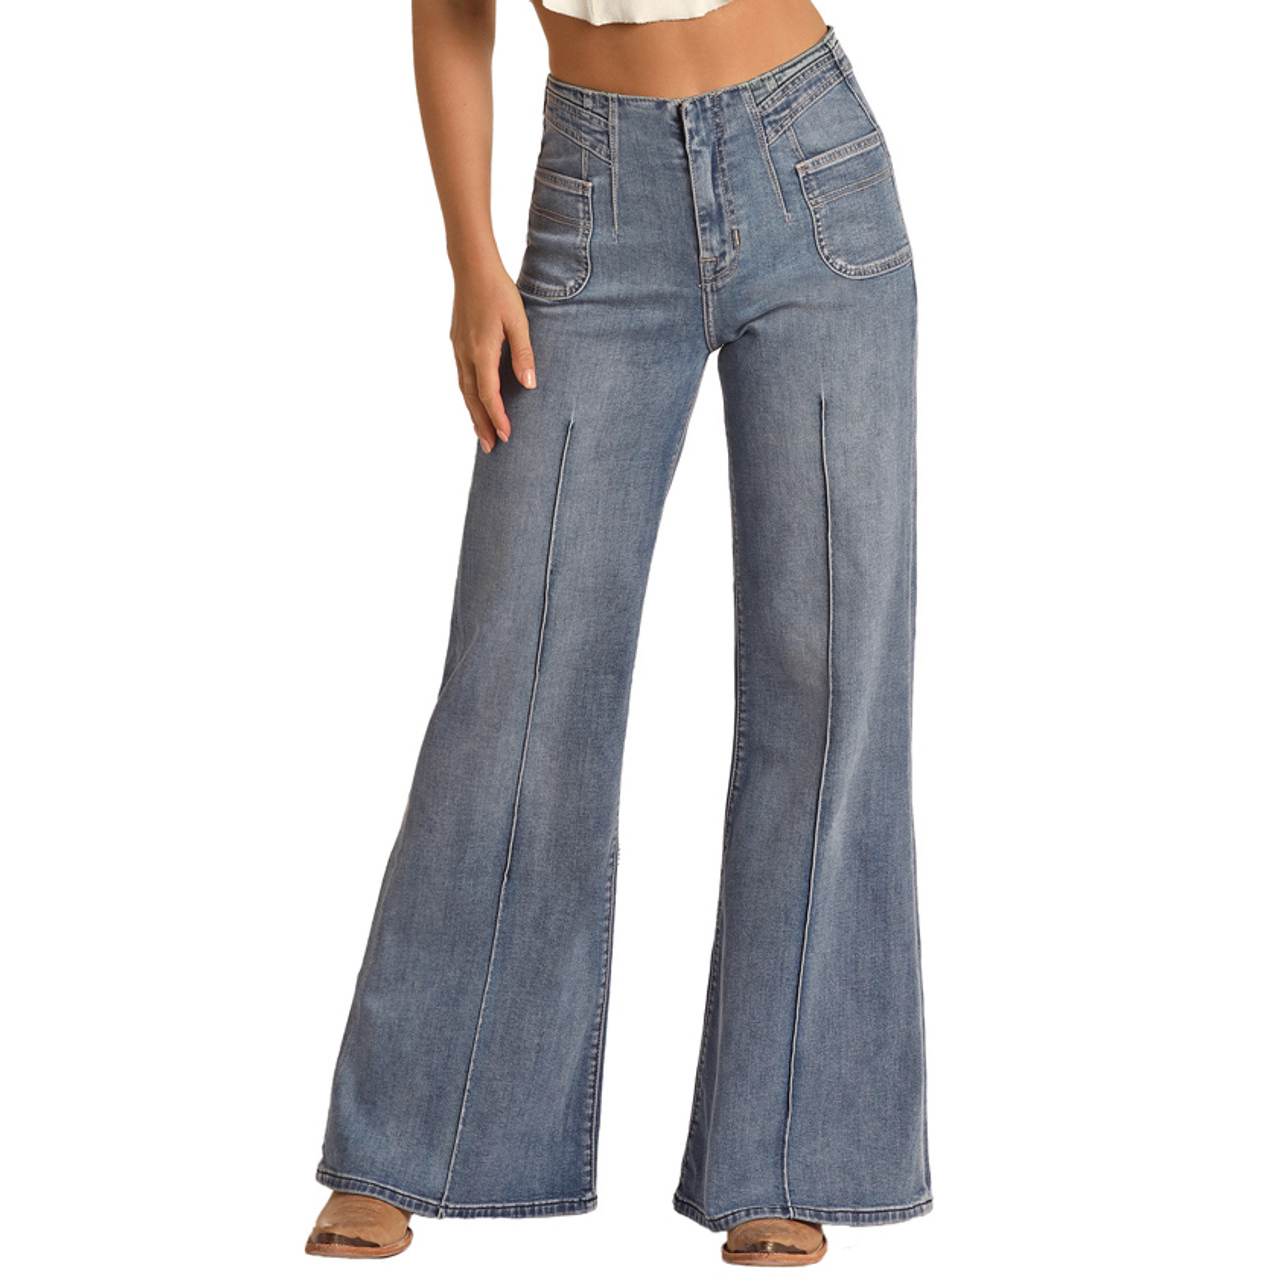 Rock & Roll Womens High Rise Extra Stretch Palazzo Flare Jeans - Medium Wash